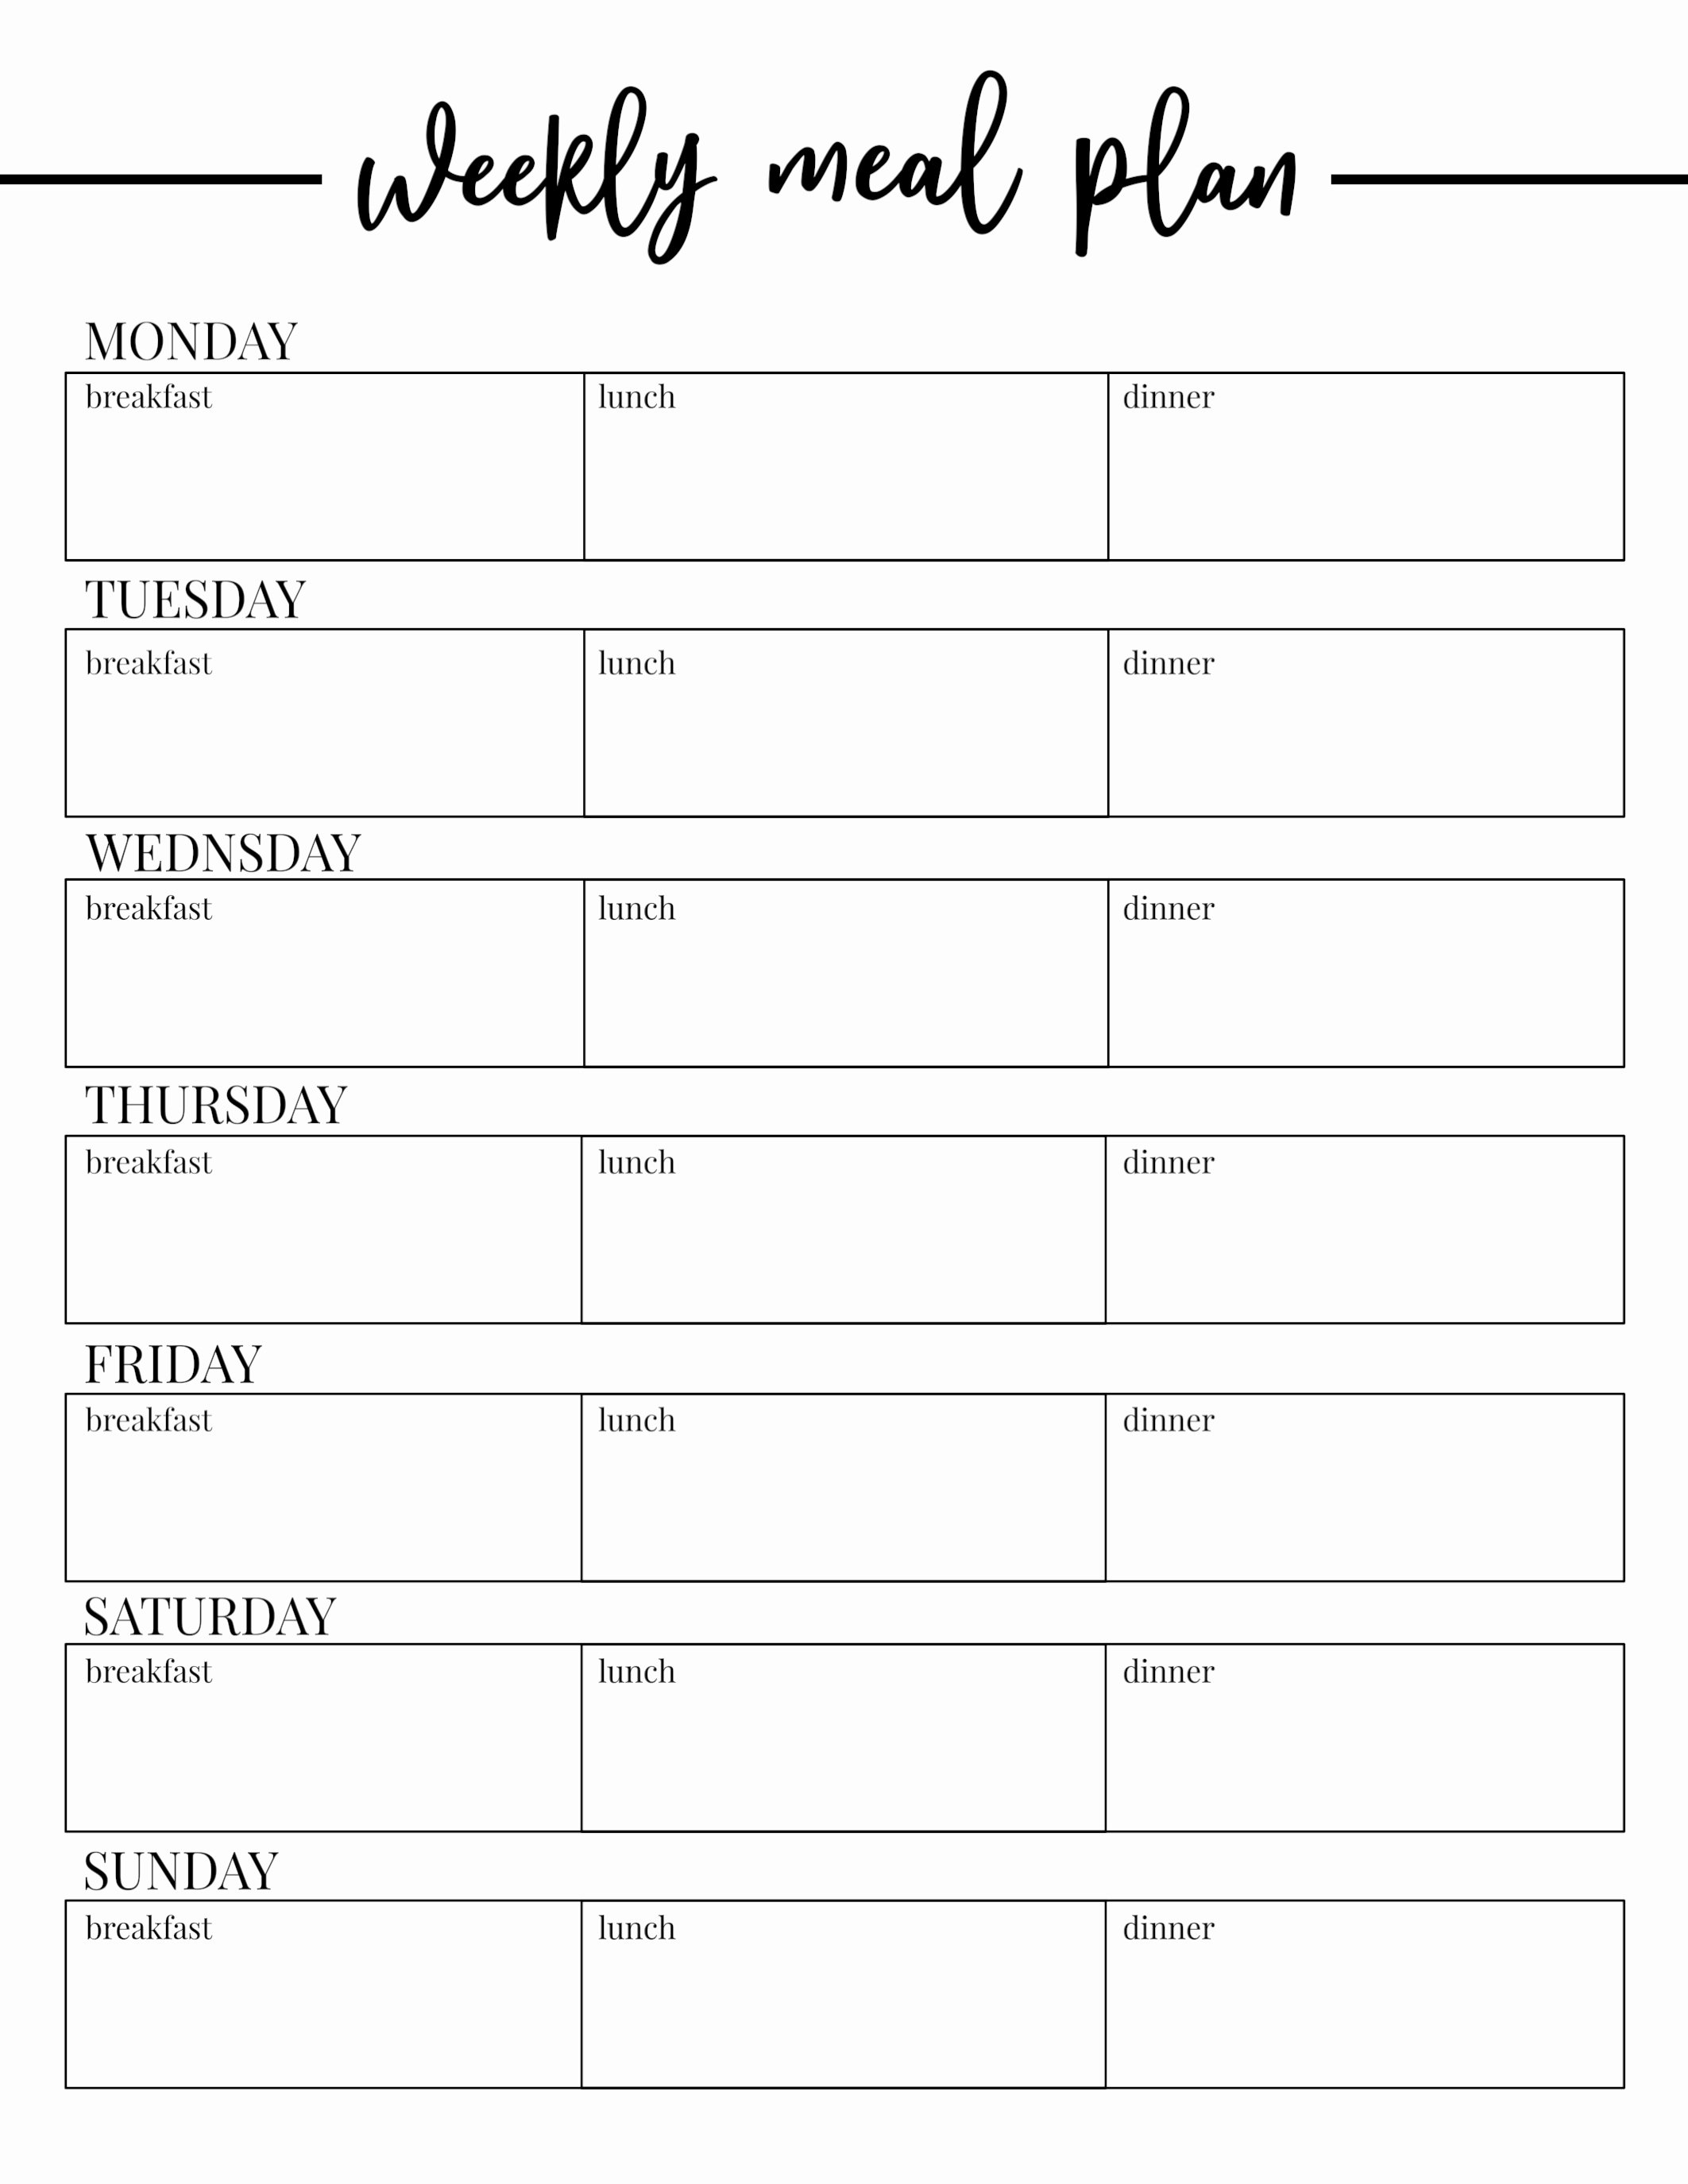 Monthly Meal Planner Template Luxury Free Printable Weekly Meal Plan Template Paper Trail Design